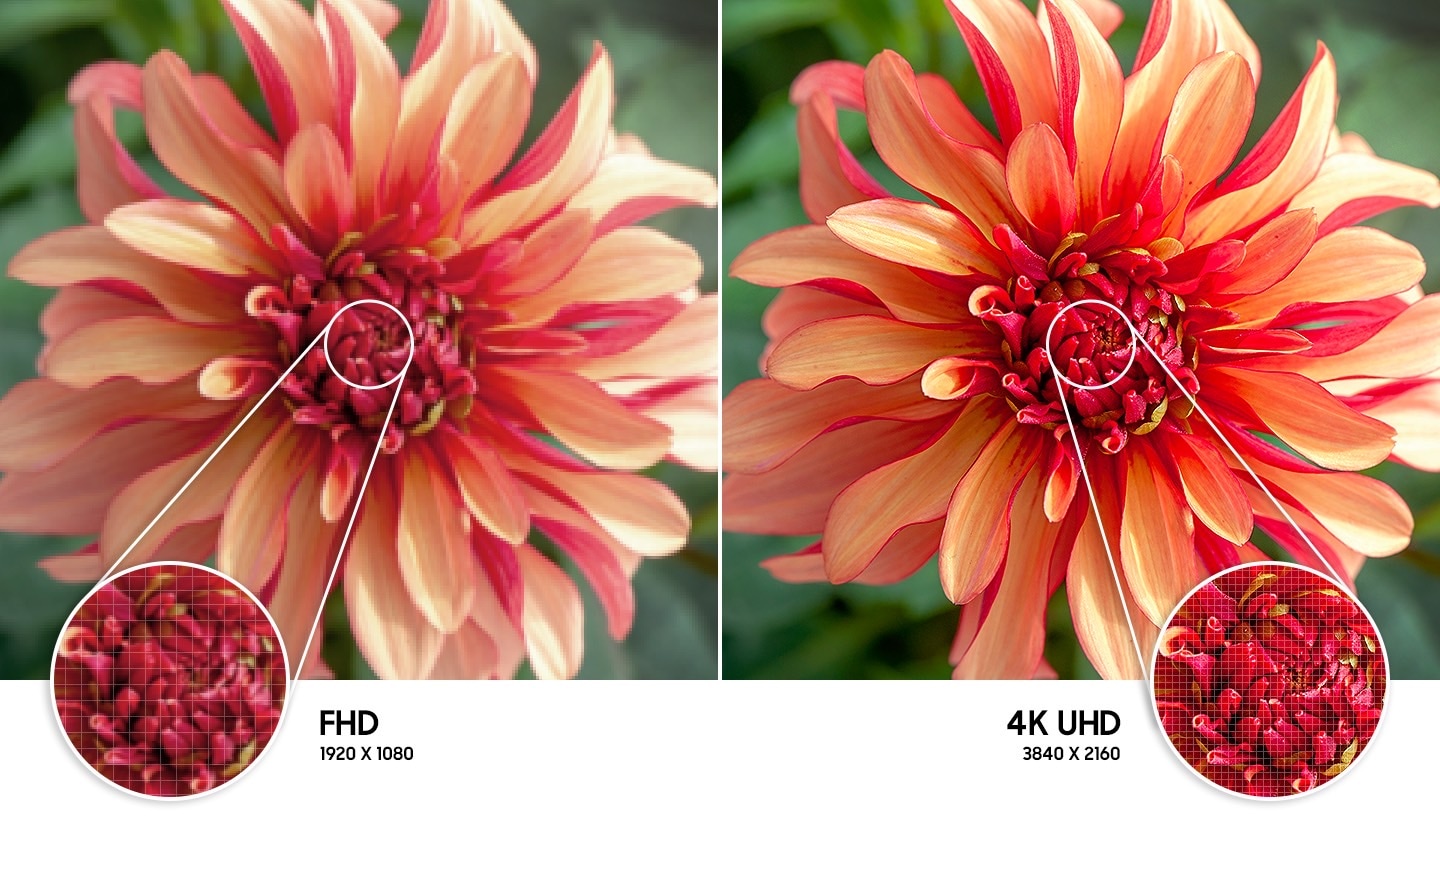 ch_fr-feature-feel-the-reality-of-4k-uhd-resolution-395547891?$FB_TYPE_A_JPG$